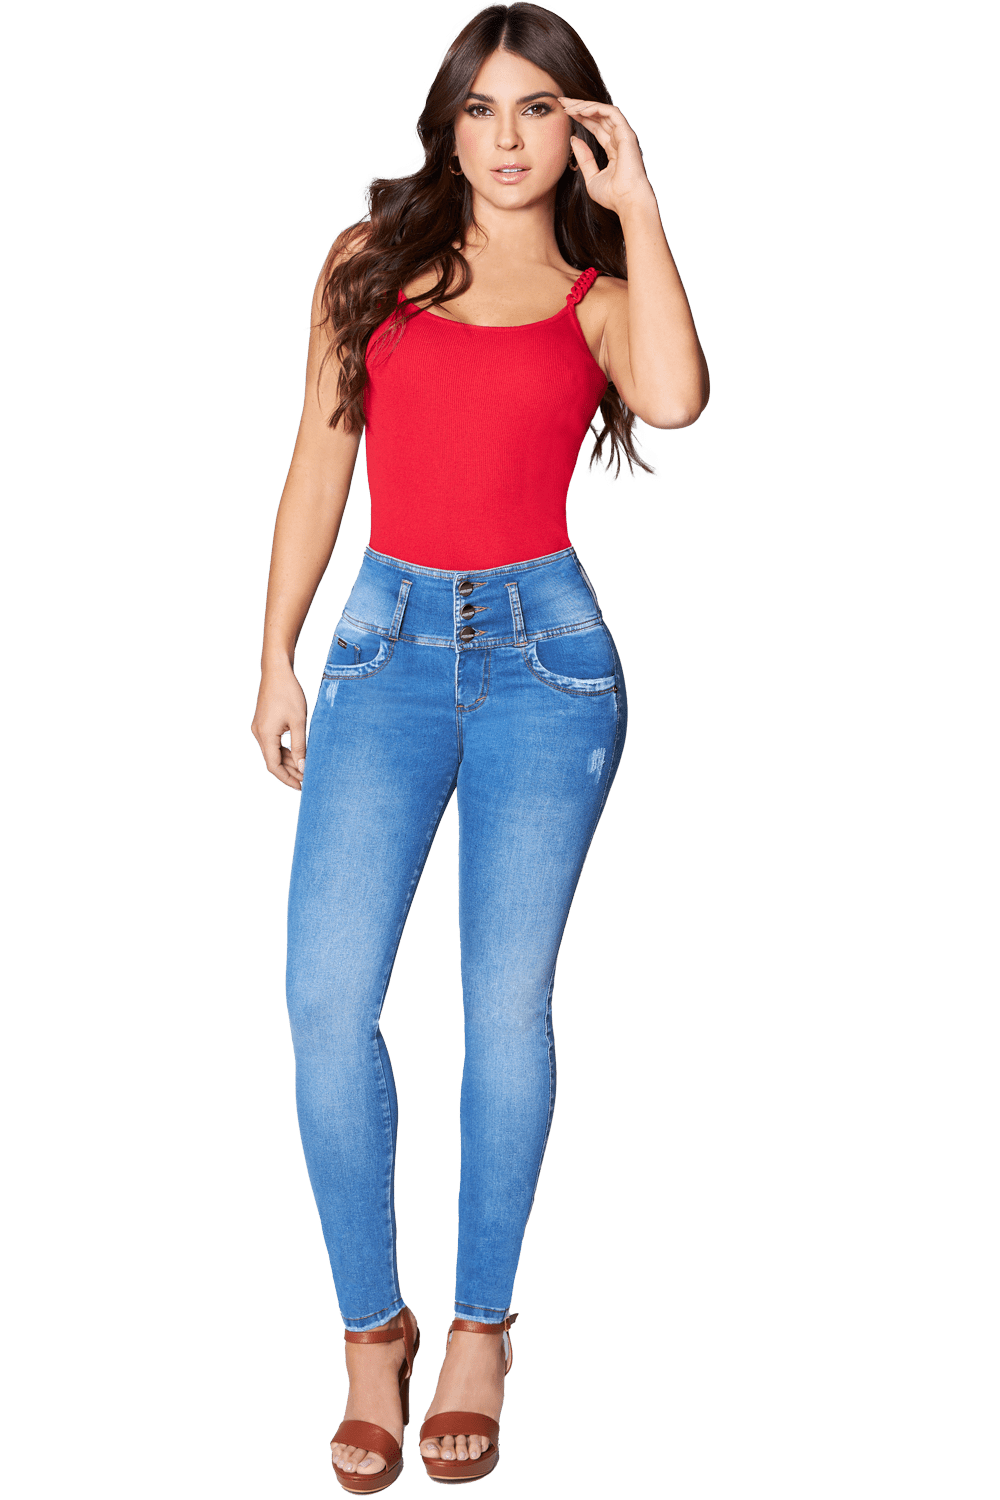 Ily Clothing Jeans Colombian Jean